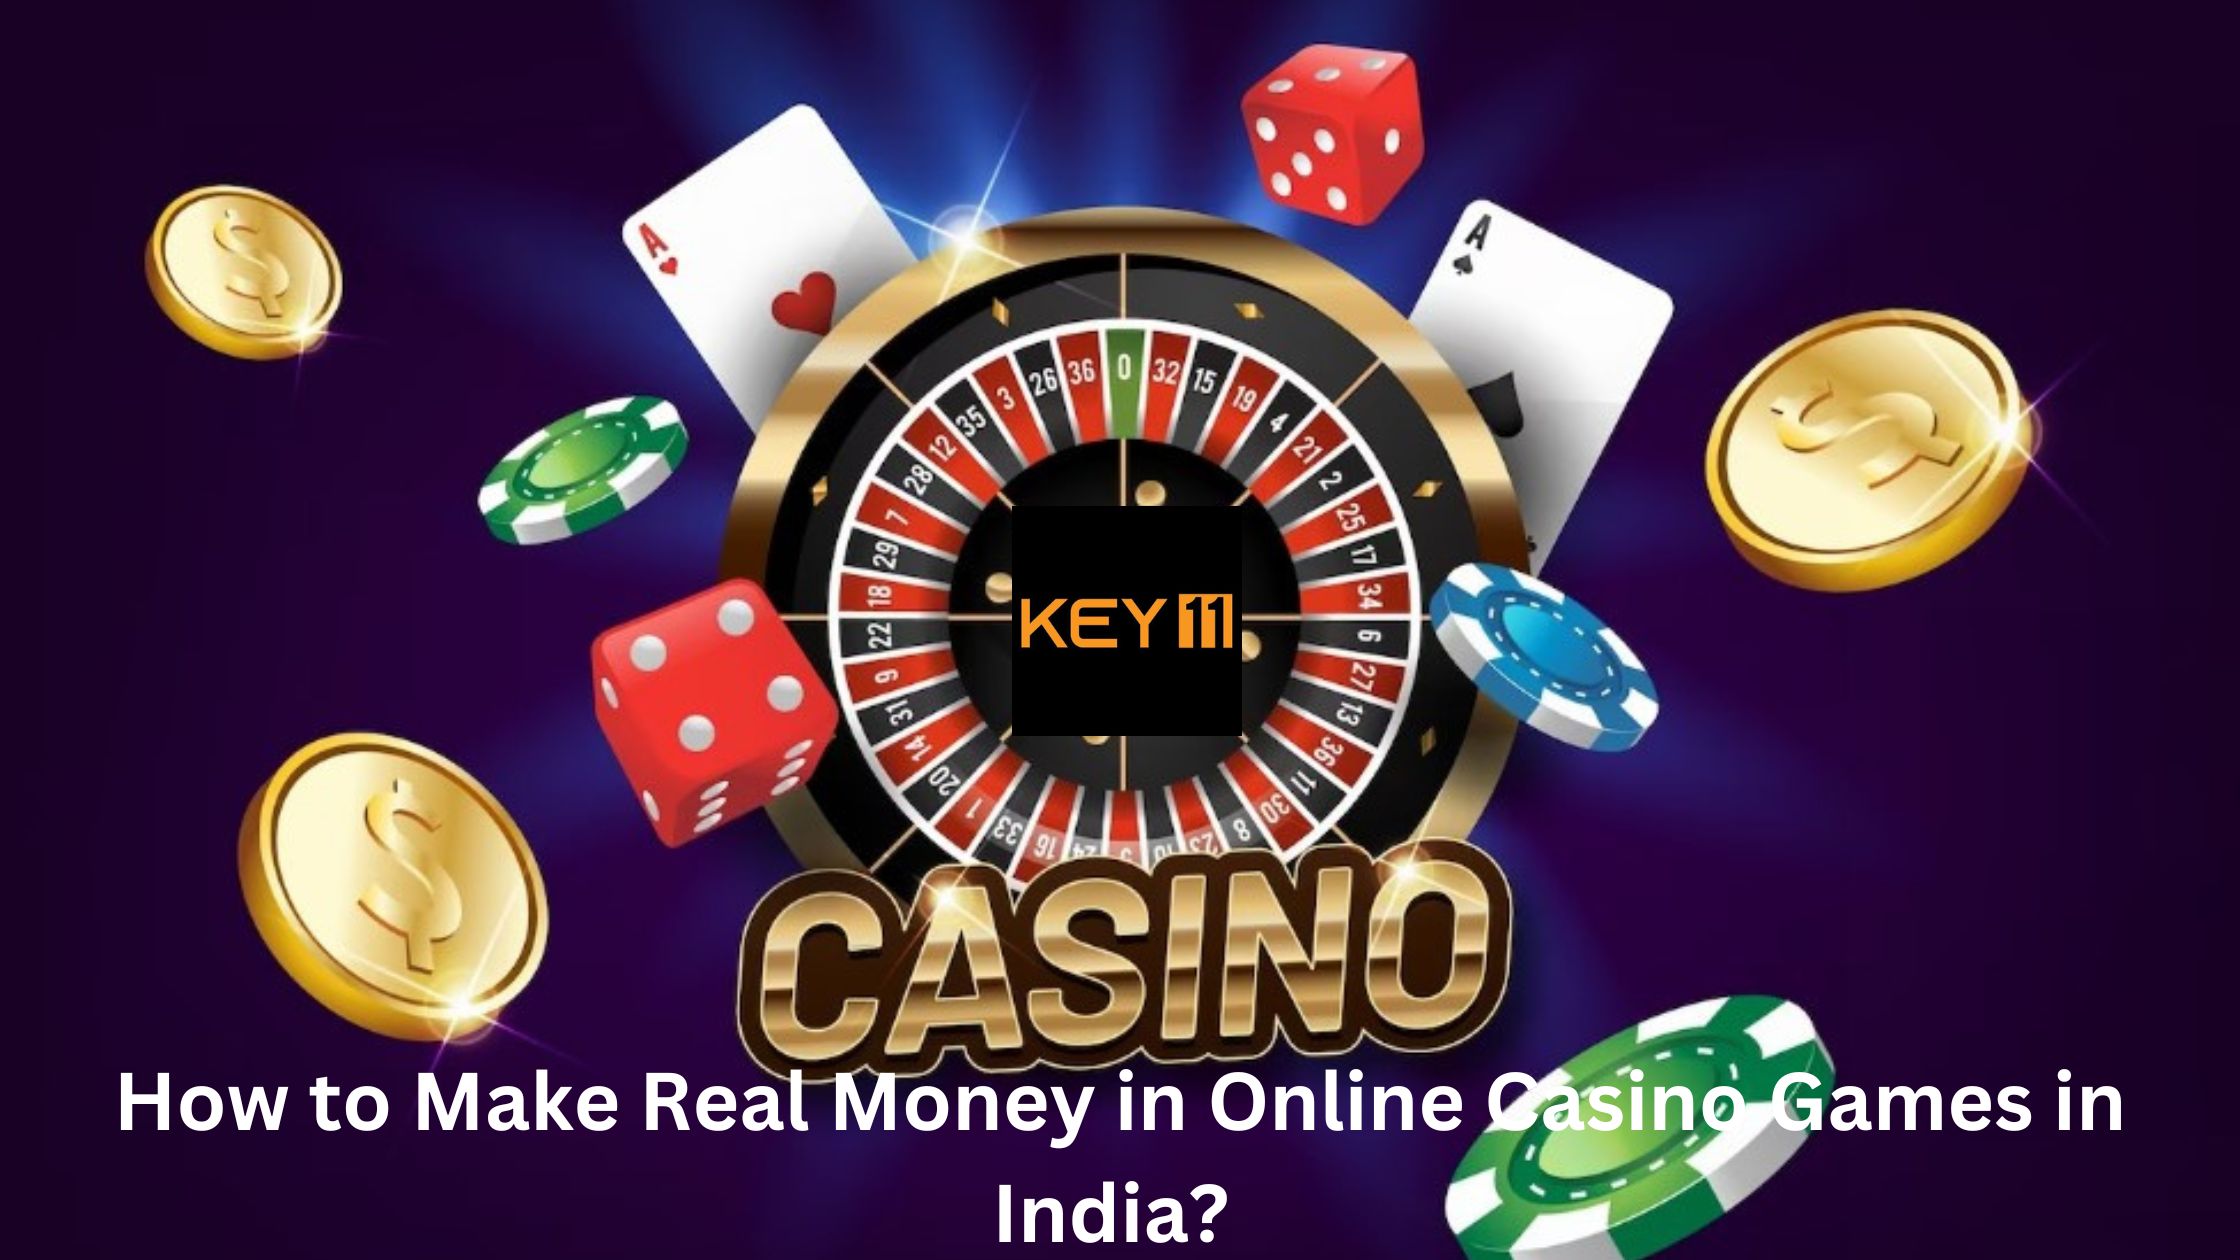 How to Make Real Money in Online Casino Games in India?